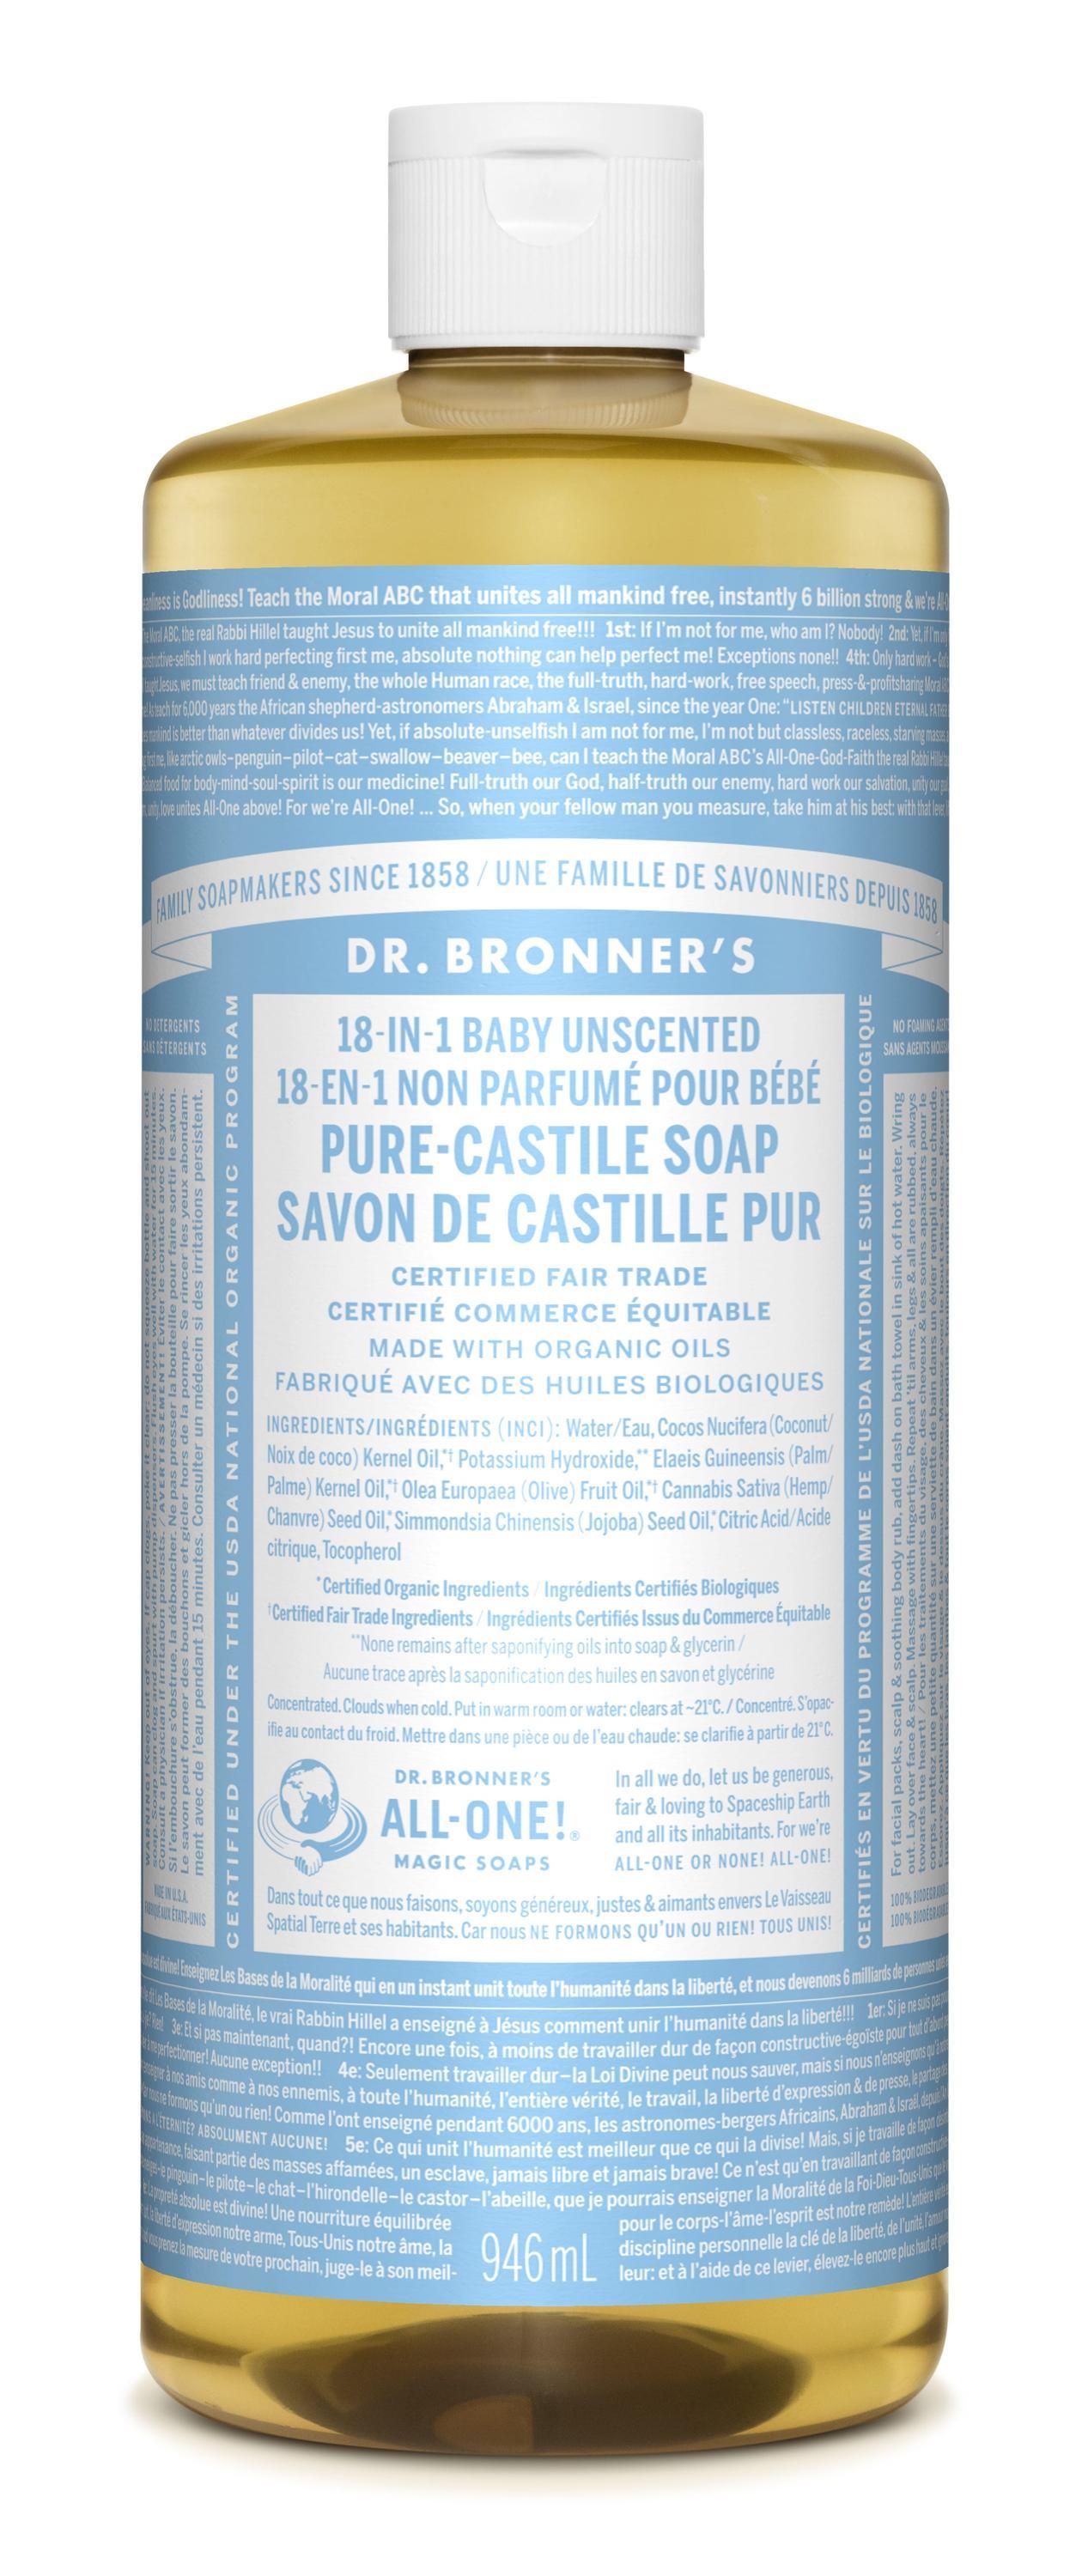 Dr. Bronner's Products Online